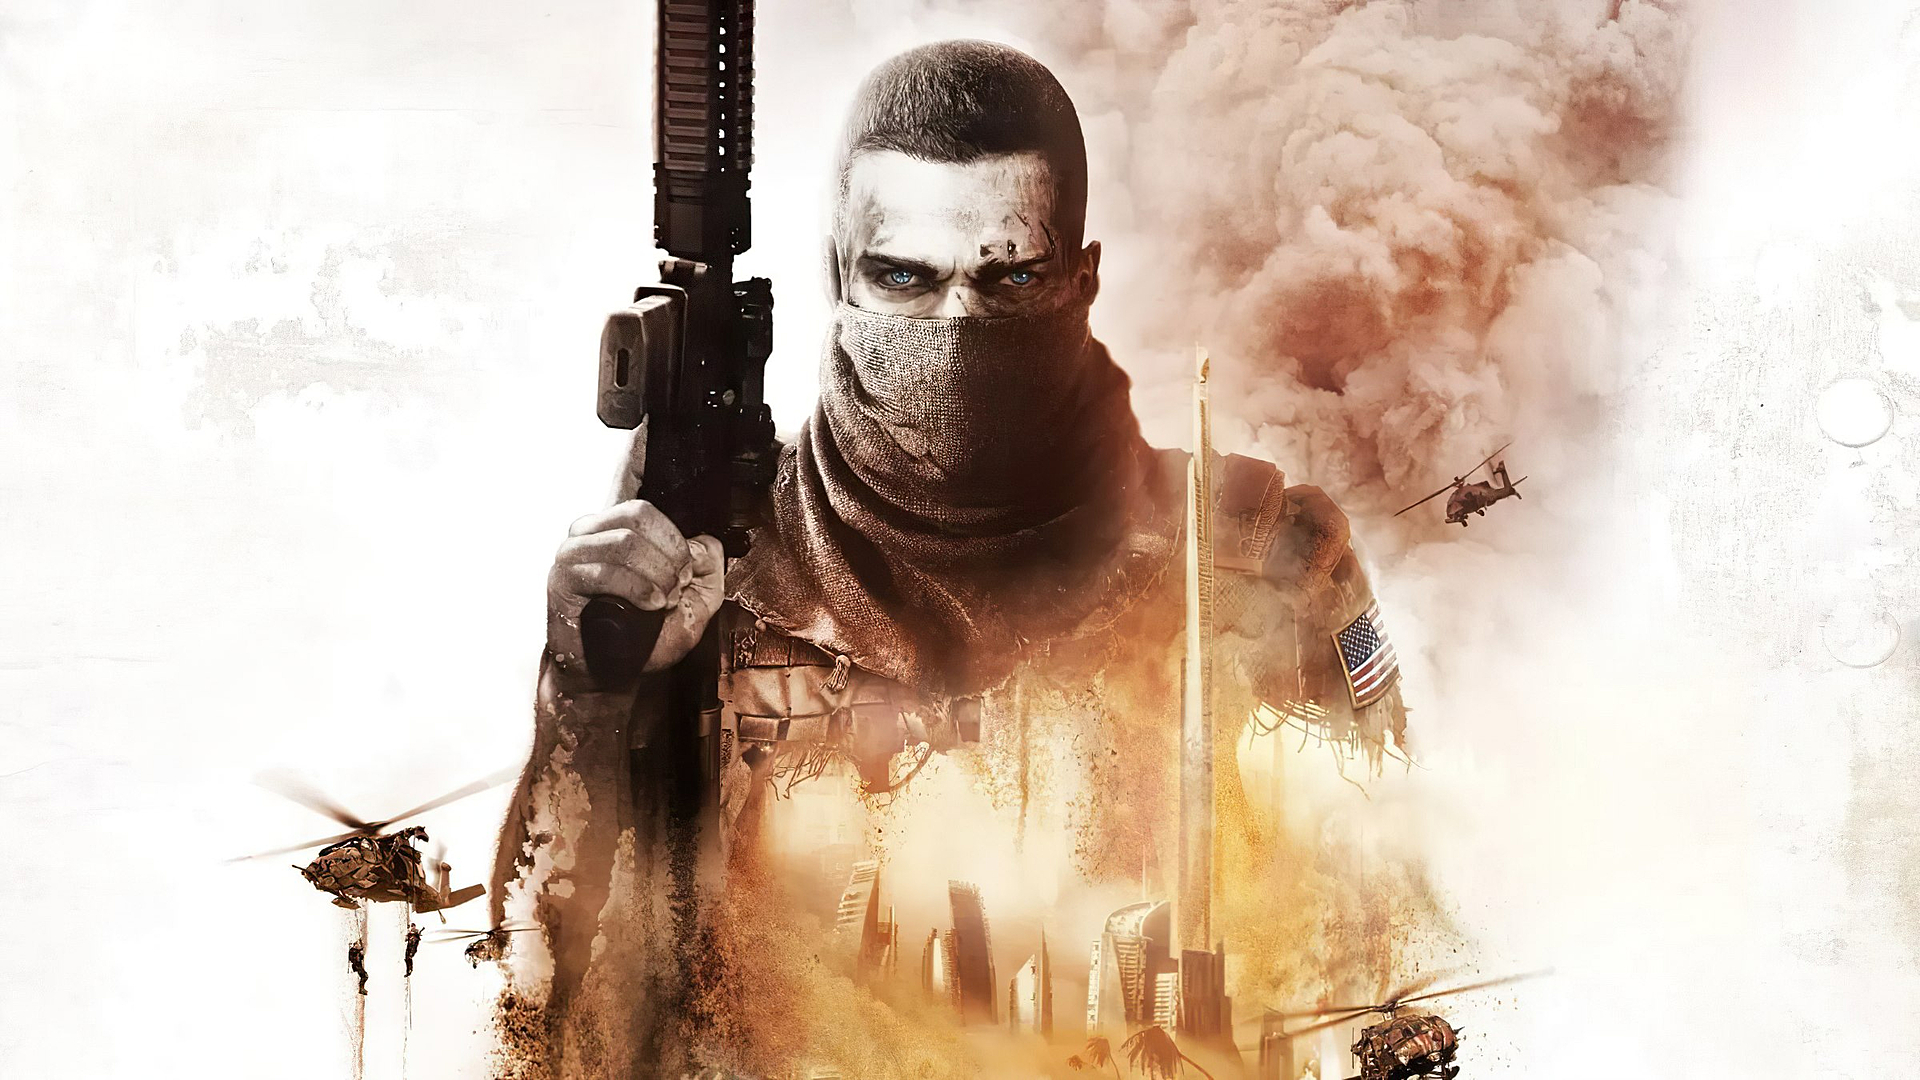 Spec Ops The Line Wallpaper Hd Games 4k Wallpapers Images Photos And Background Wallpapers Den